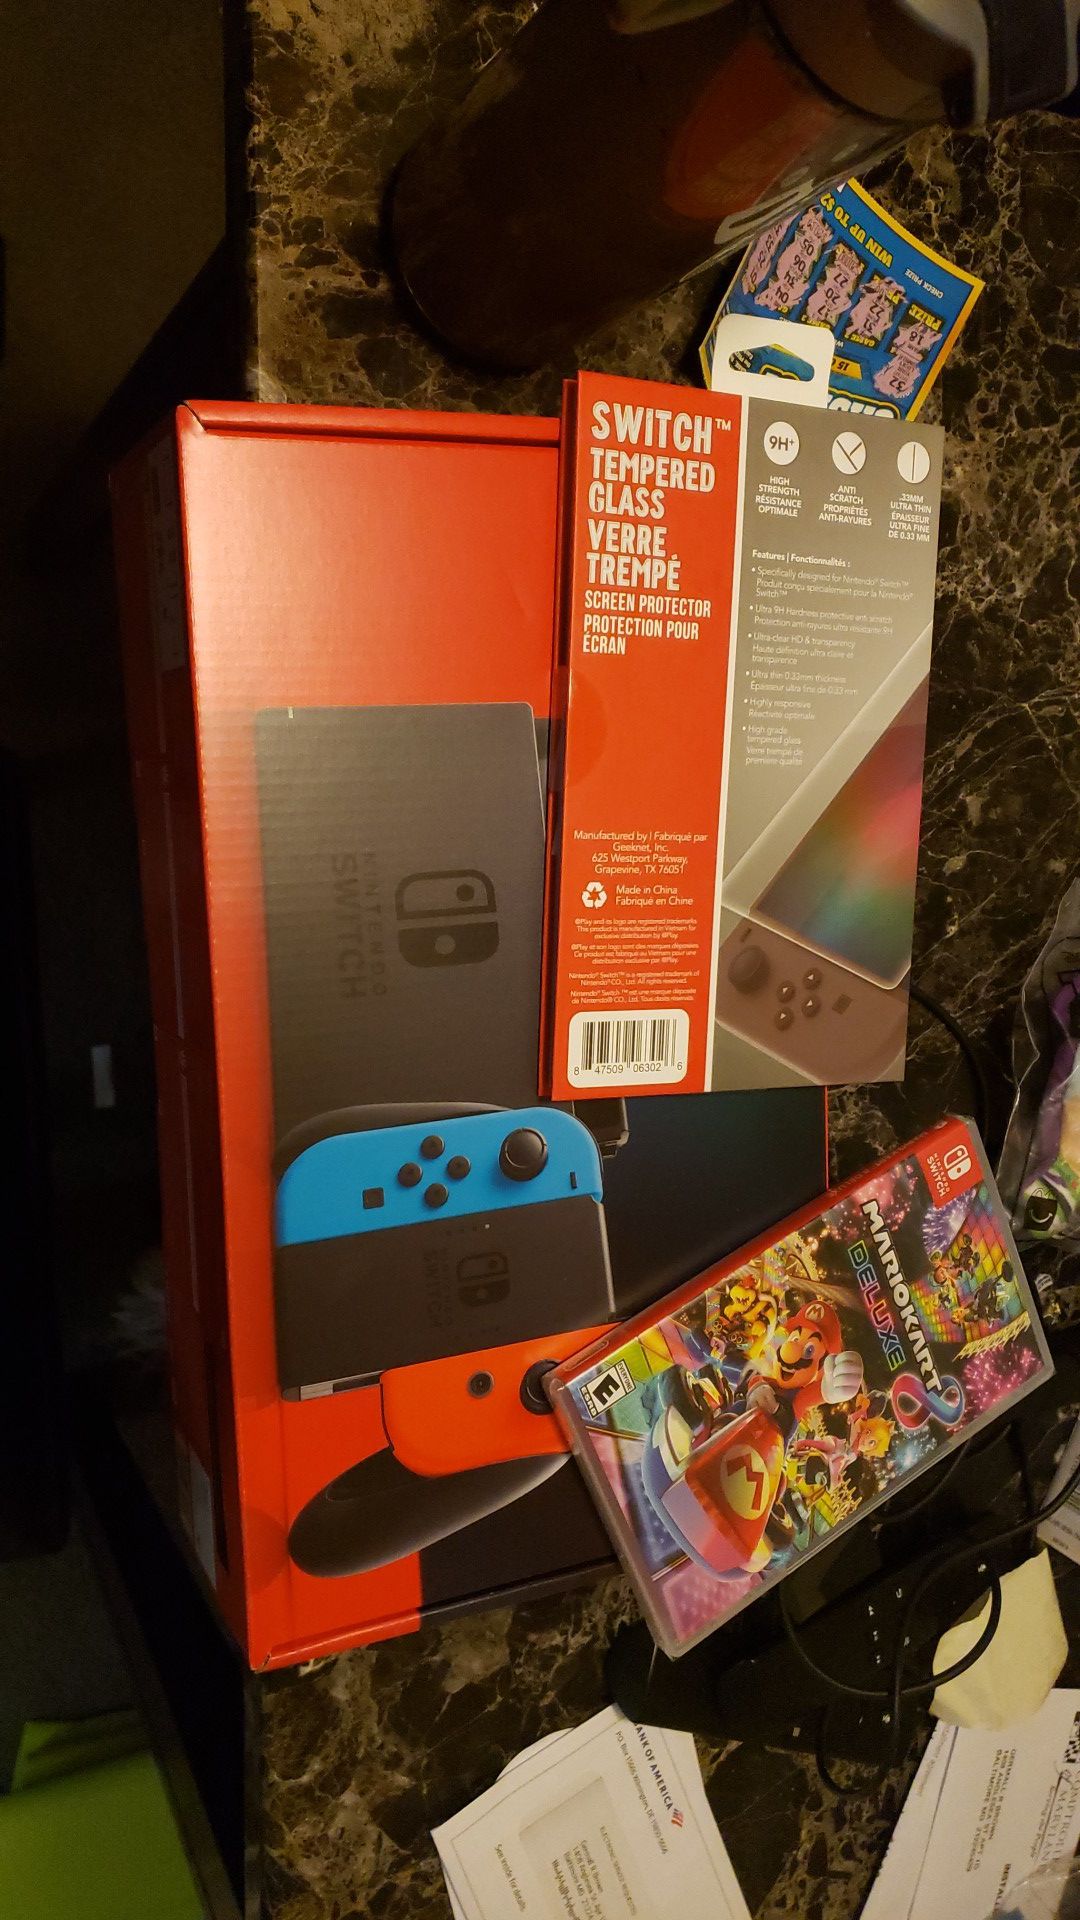 Nintendo Switch with blue and red joycons. $500 comes with mario kart and screen protector. You can also add games from my other listing.